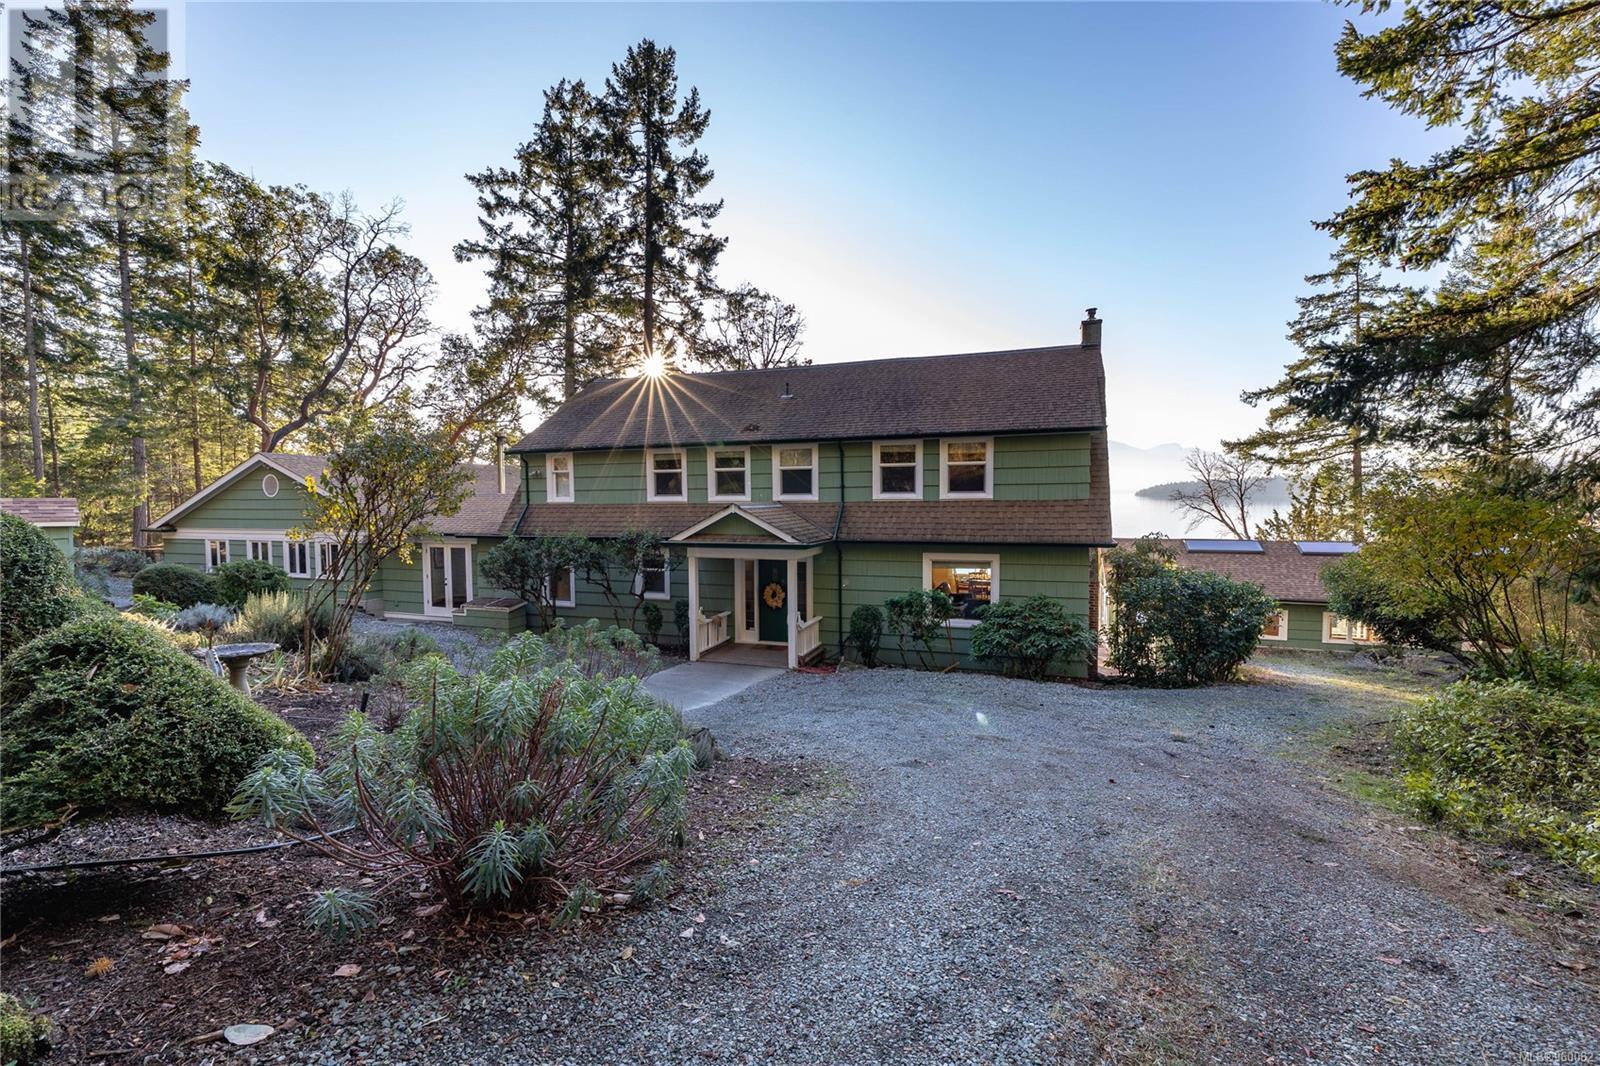 2860 Southey Point Rd, Salt Spring